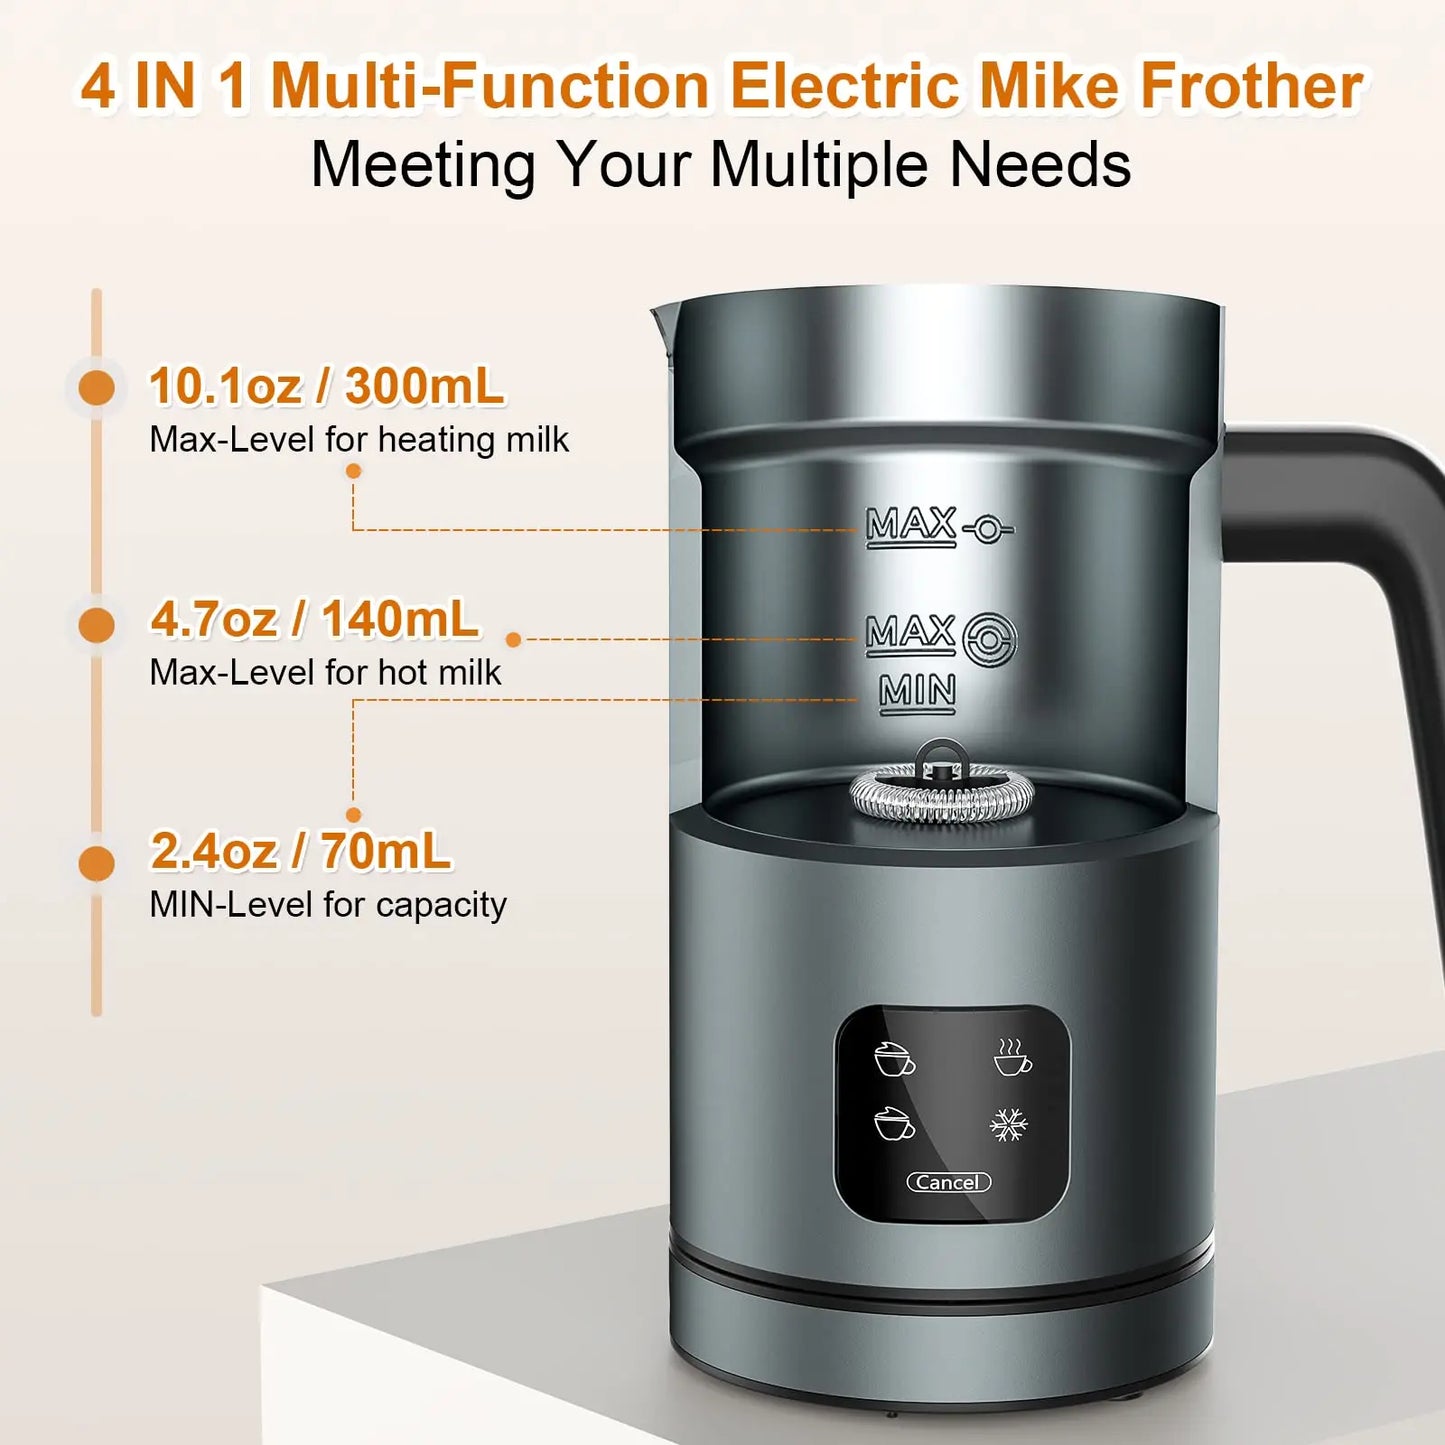 https://bizewohome.com/cdn/shop/files/Frother-for-Coffee_-Milk-Frother_-4-IN-1-Automatic-Warm-and-Cold-Milk-Foamer_-BIZEWO-Stainless-Steel-Milk-Steamer-for-Latte_-Cappuccinos_-Macchiato_-Hot-Chocolate-Milk-with-LED-Touch_f39ffb56-d0ff-441a-bcb4-4df9d29e4d81_1445x.jpg?v=1690162798